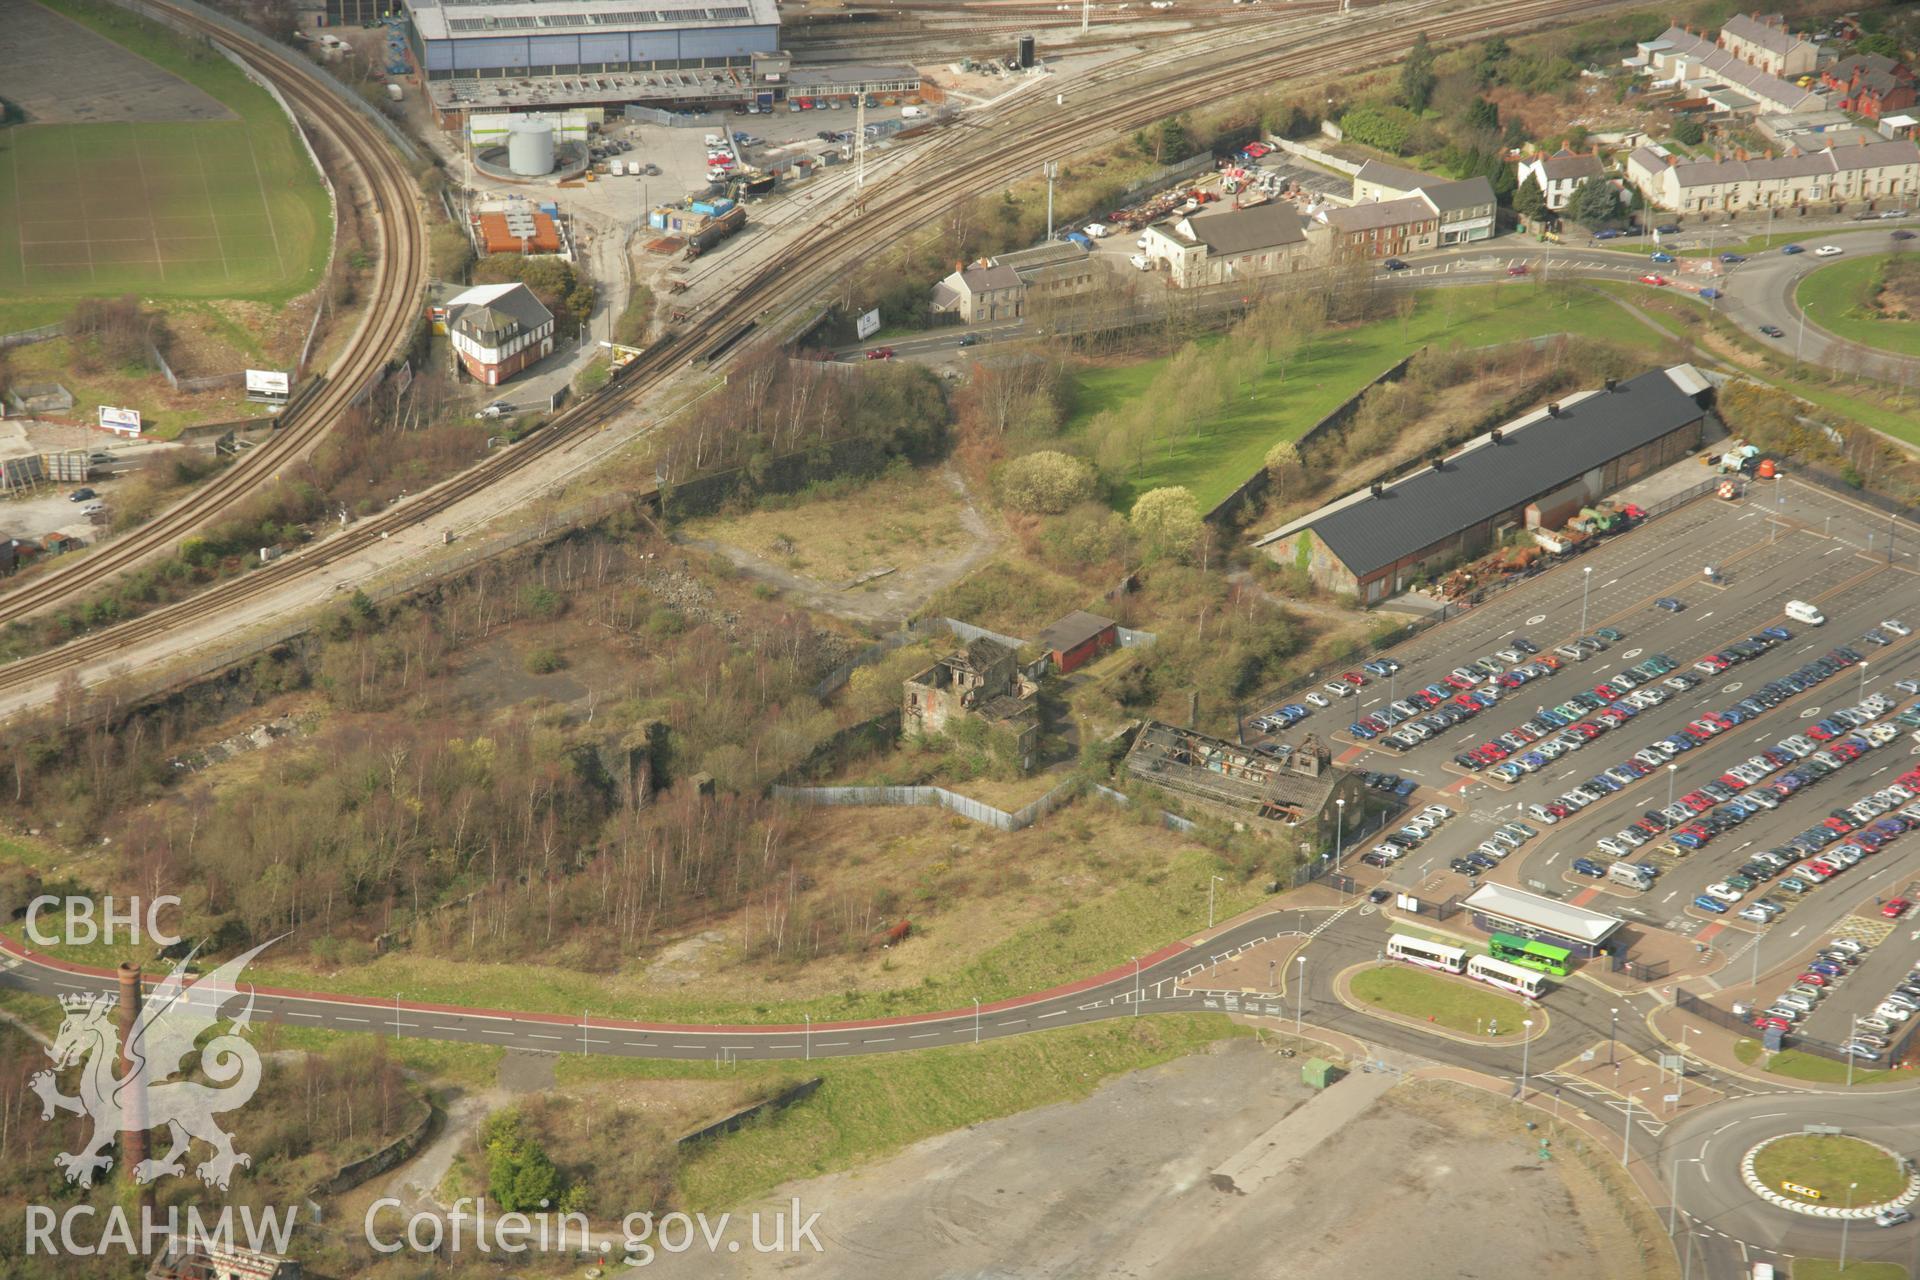 RCAHMW colour oblique aerial photograph of Morfa Copperworks Power House and Canteen, Swansea. Taken on 16 March 2007 by Toby Driver